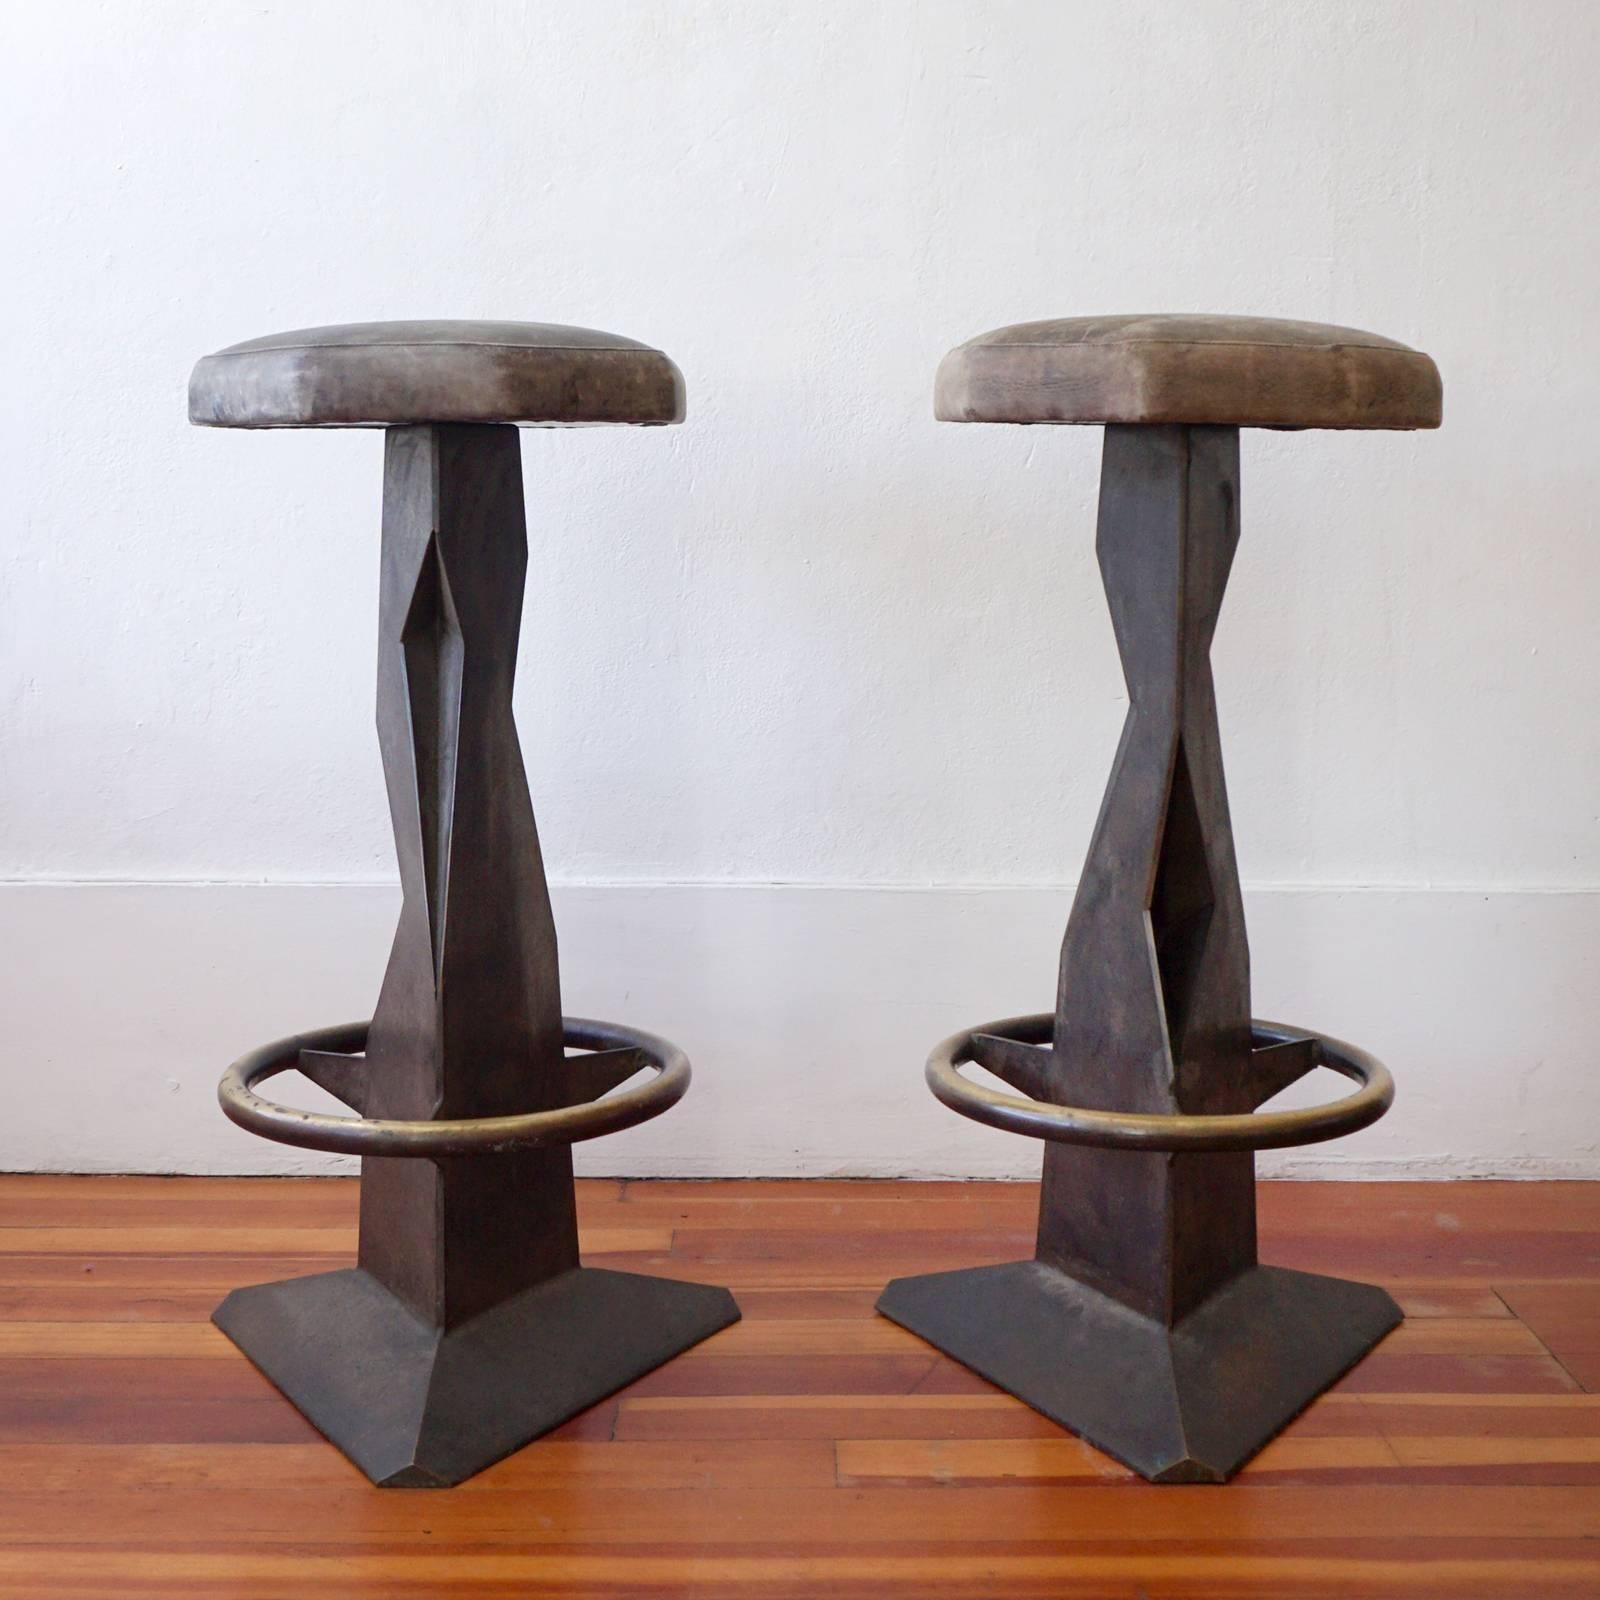 A pair of brutalist metal bar stools with a bronze finish and octagonal leather seats. High quality construction with a rich patina. The rotating seats are two different colors.